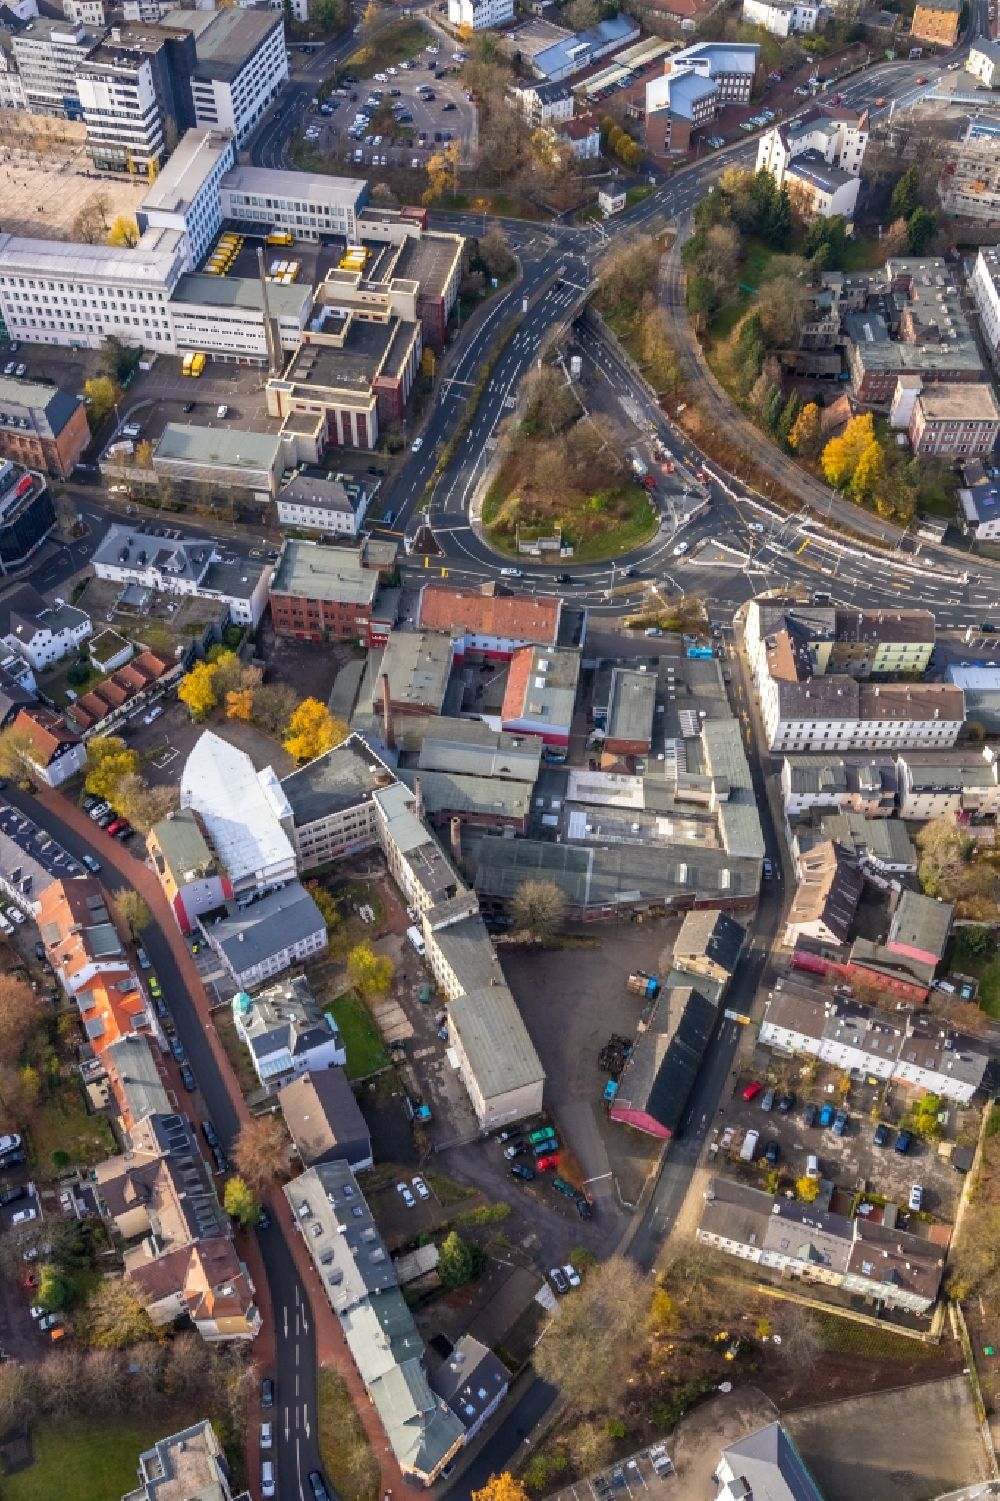 Lüdenscheid from the bird's eye view: Mixing of residential and commercial settlements on Humboldtstrasse and Gasstrasse in Luedenscheid in the state North Rhine-Westphalia, Germany